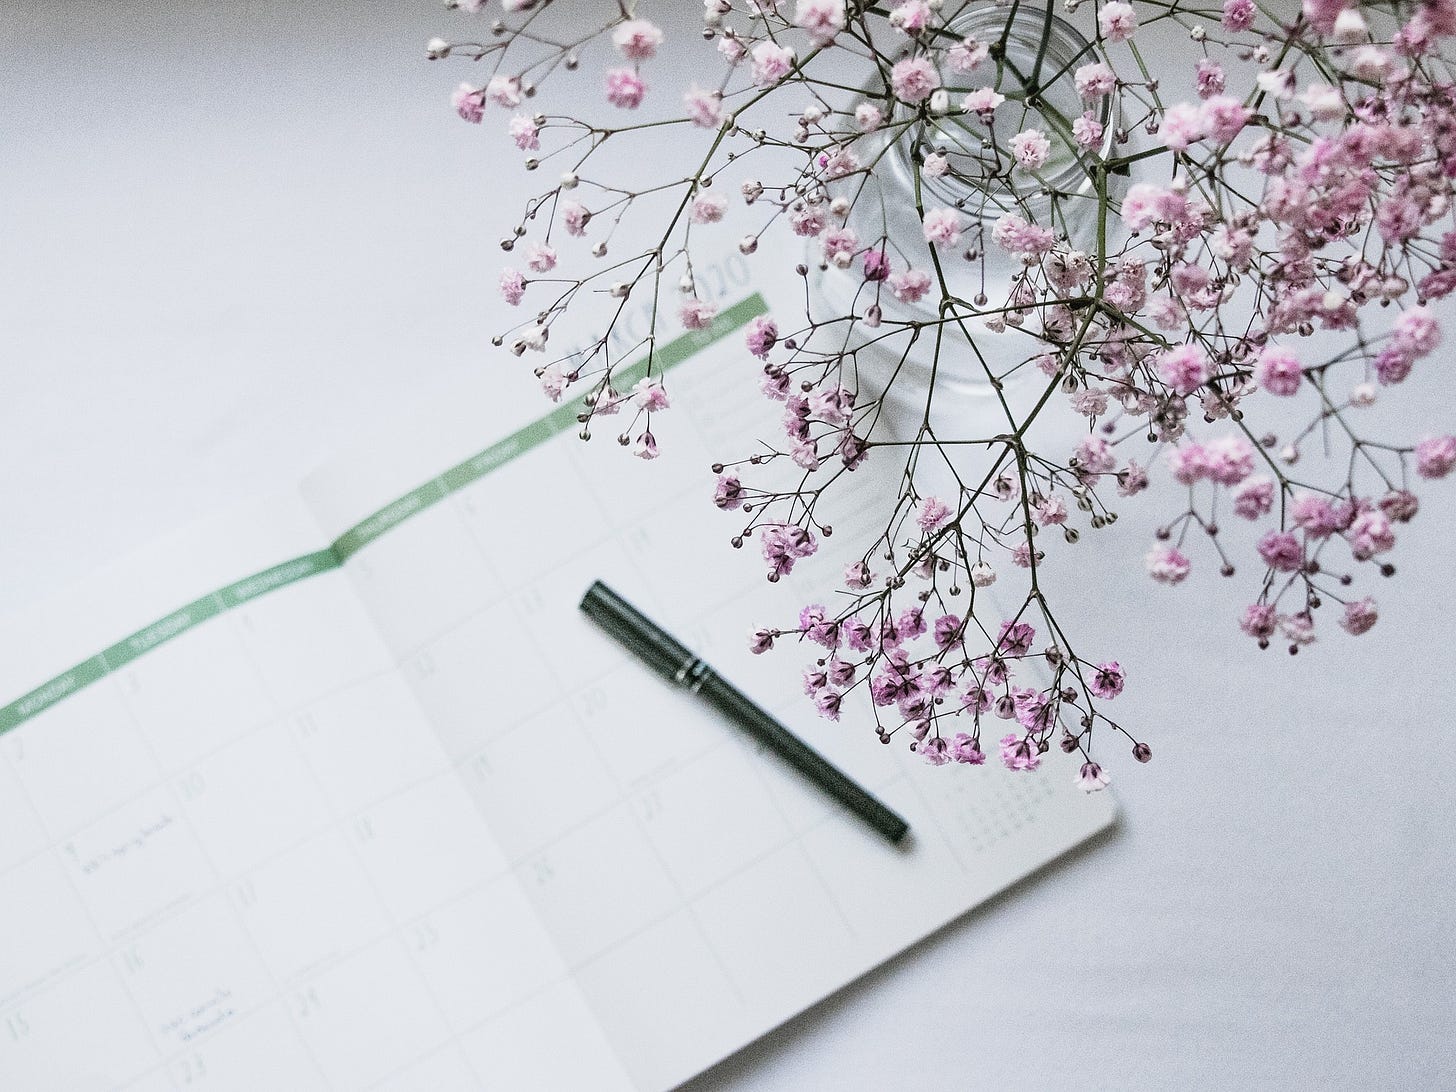 An open diary on a white table. A black pen rests on the diary. A vase of pink flowers leans over the diary.